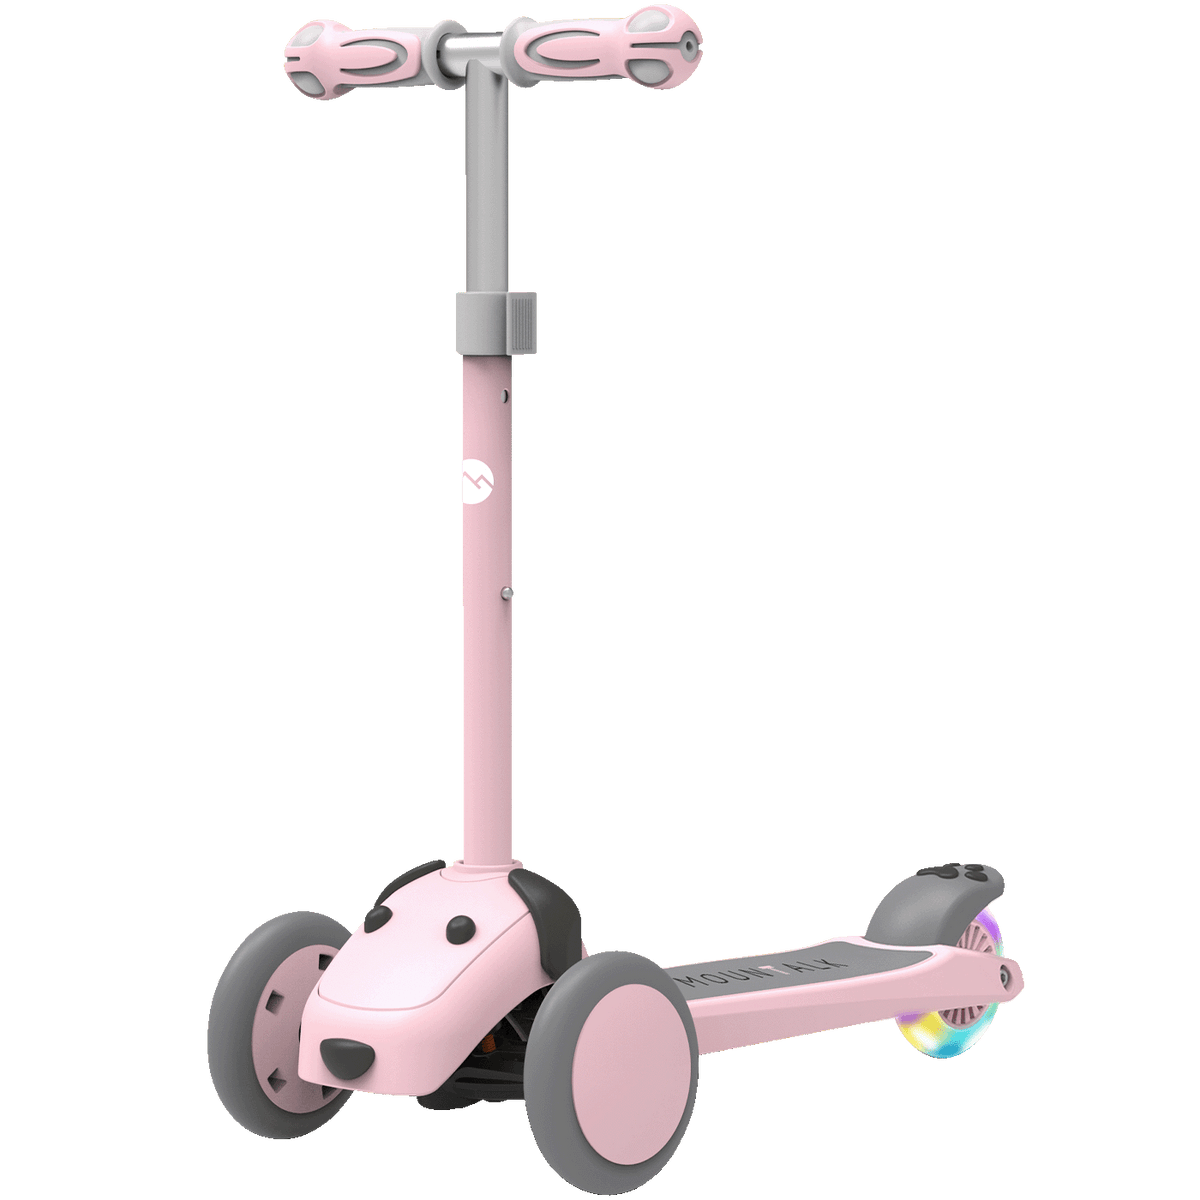 3 Wheels Foldable Kids Scooter with Adjustable Heights and LED Wheel, Dog, Pink